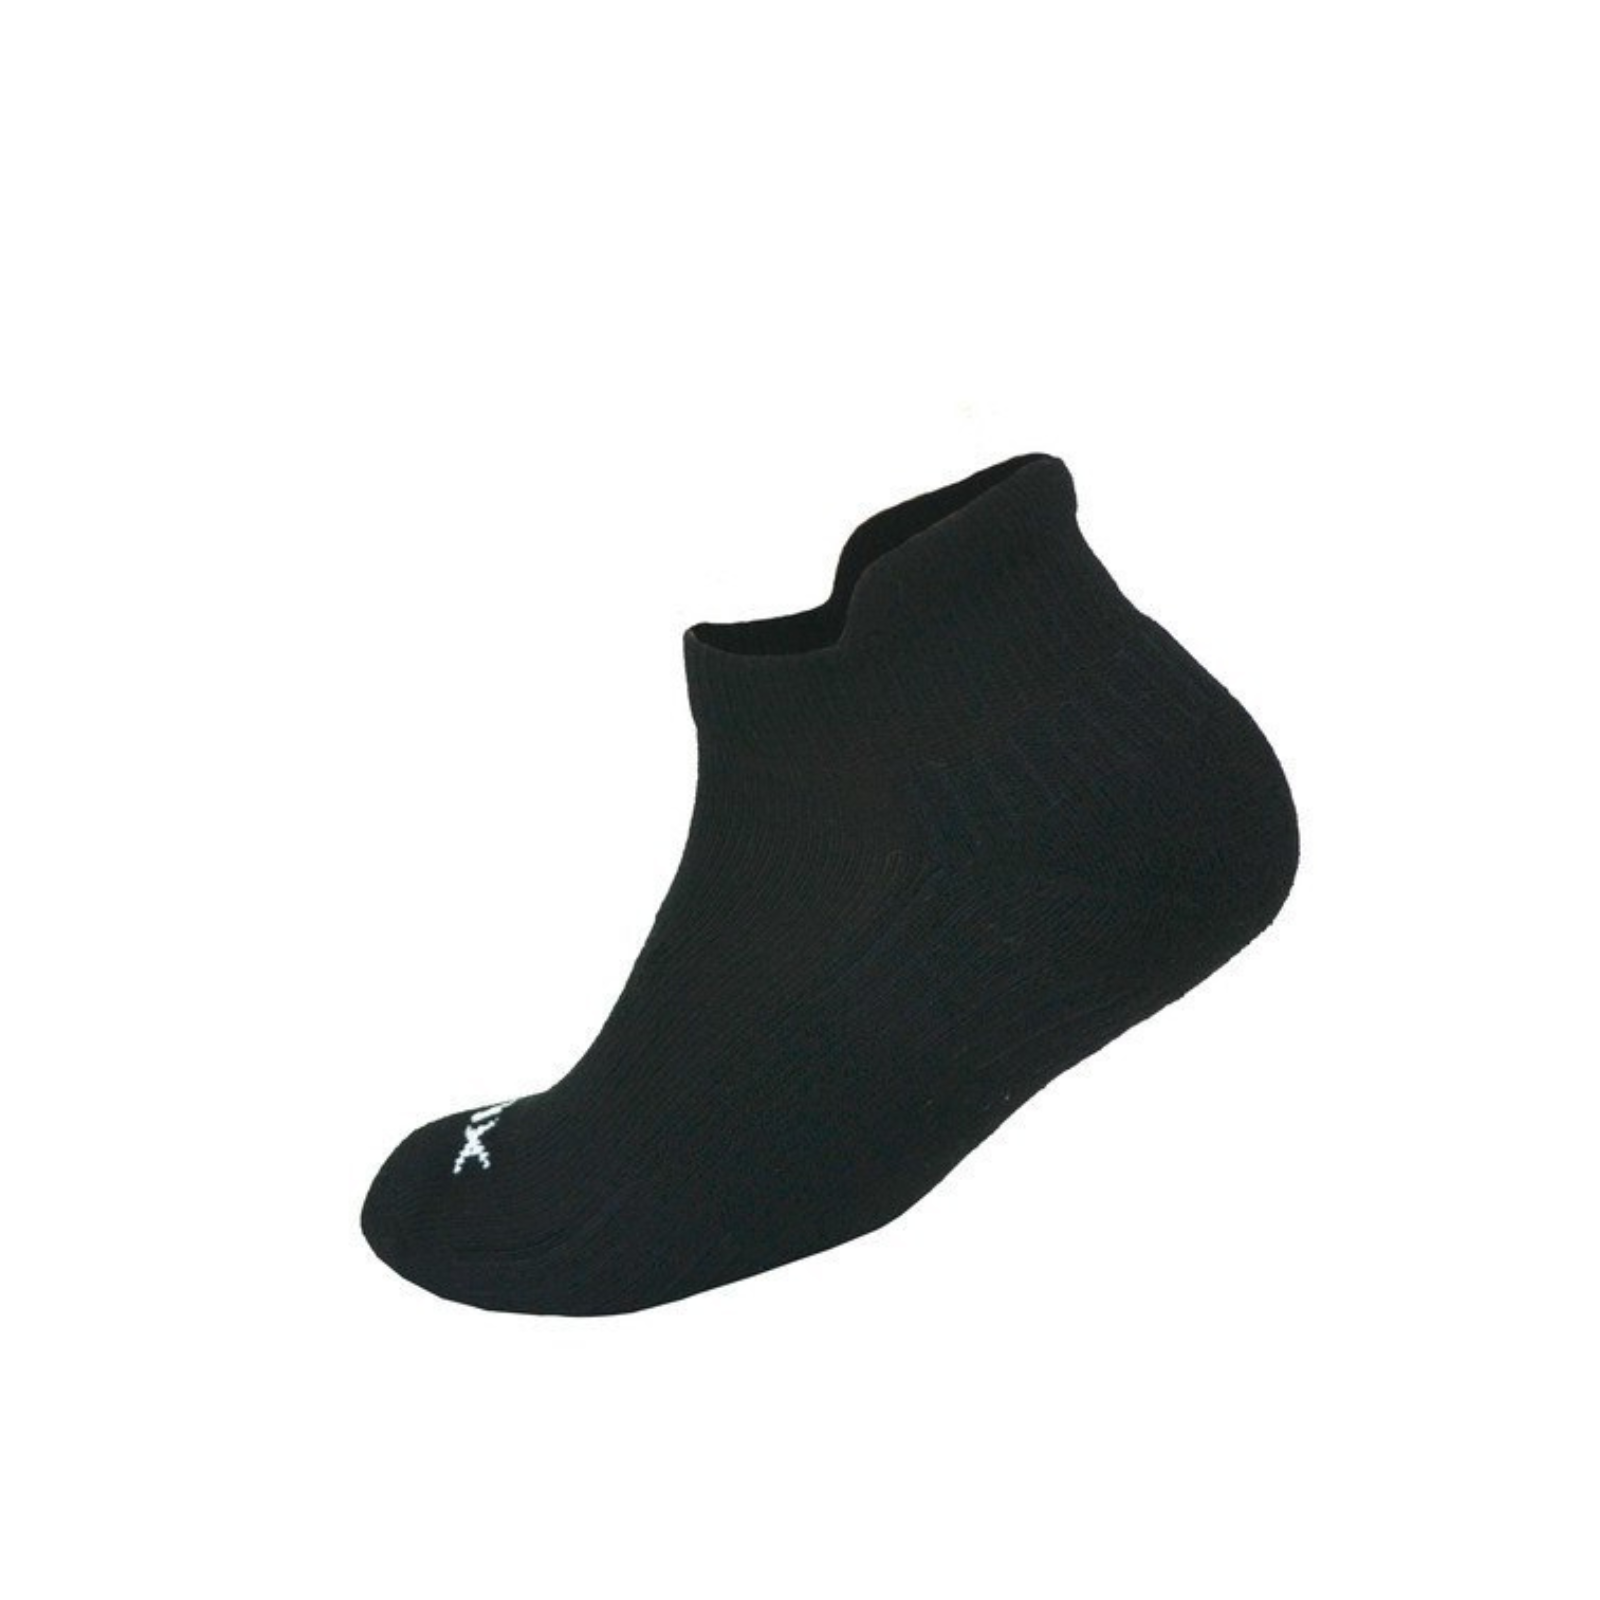 EcoSox Bamboo Sport Tab women's and men's sock in black